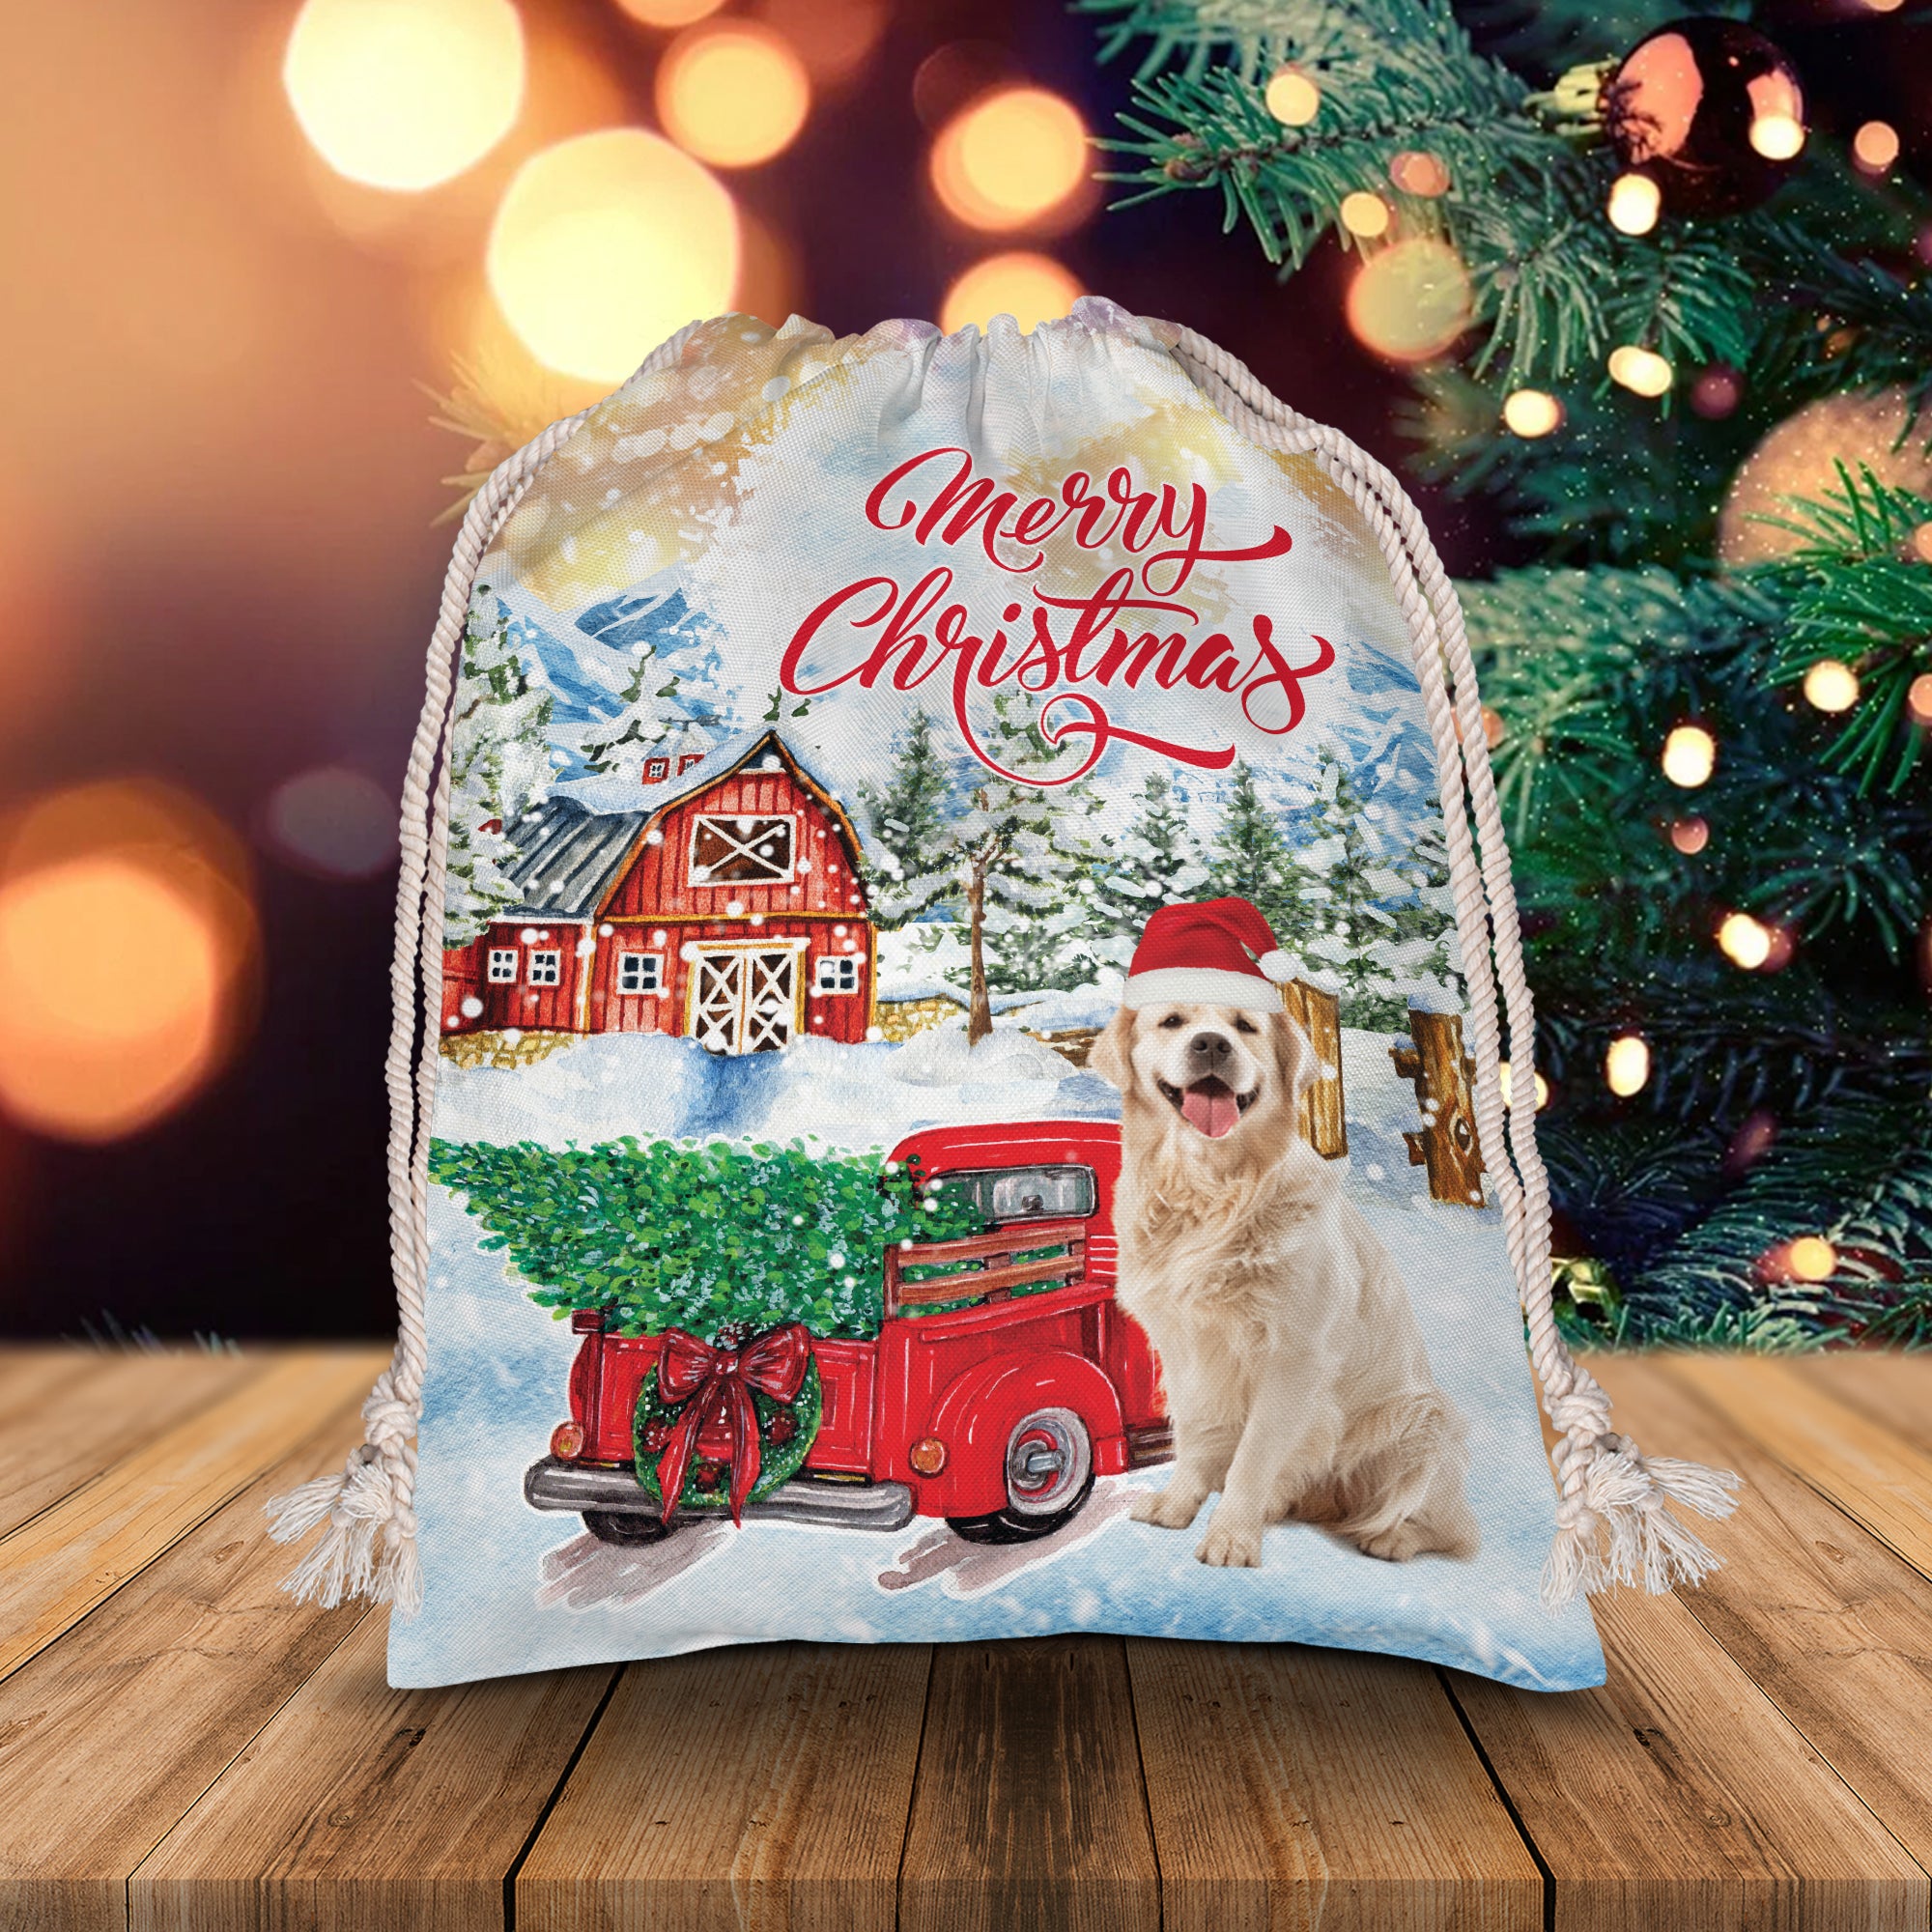 Merry Christmas Pet With Red Car - Custom Photo, Personalized String Bag, Gift For Pet Lover, Christmas Gift